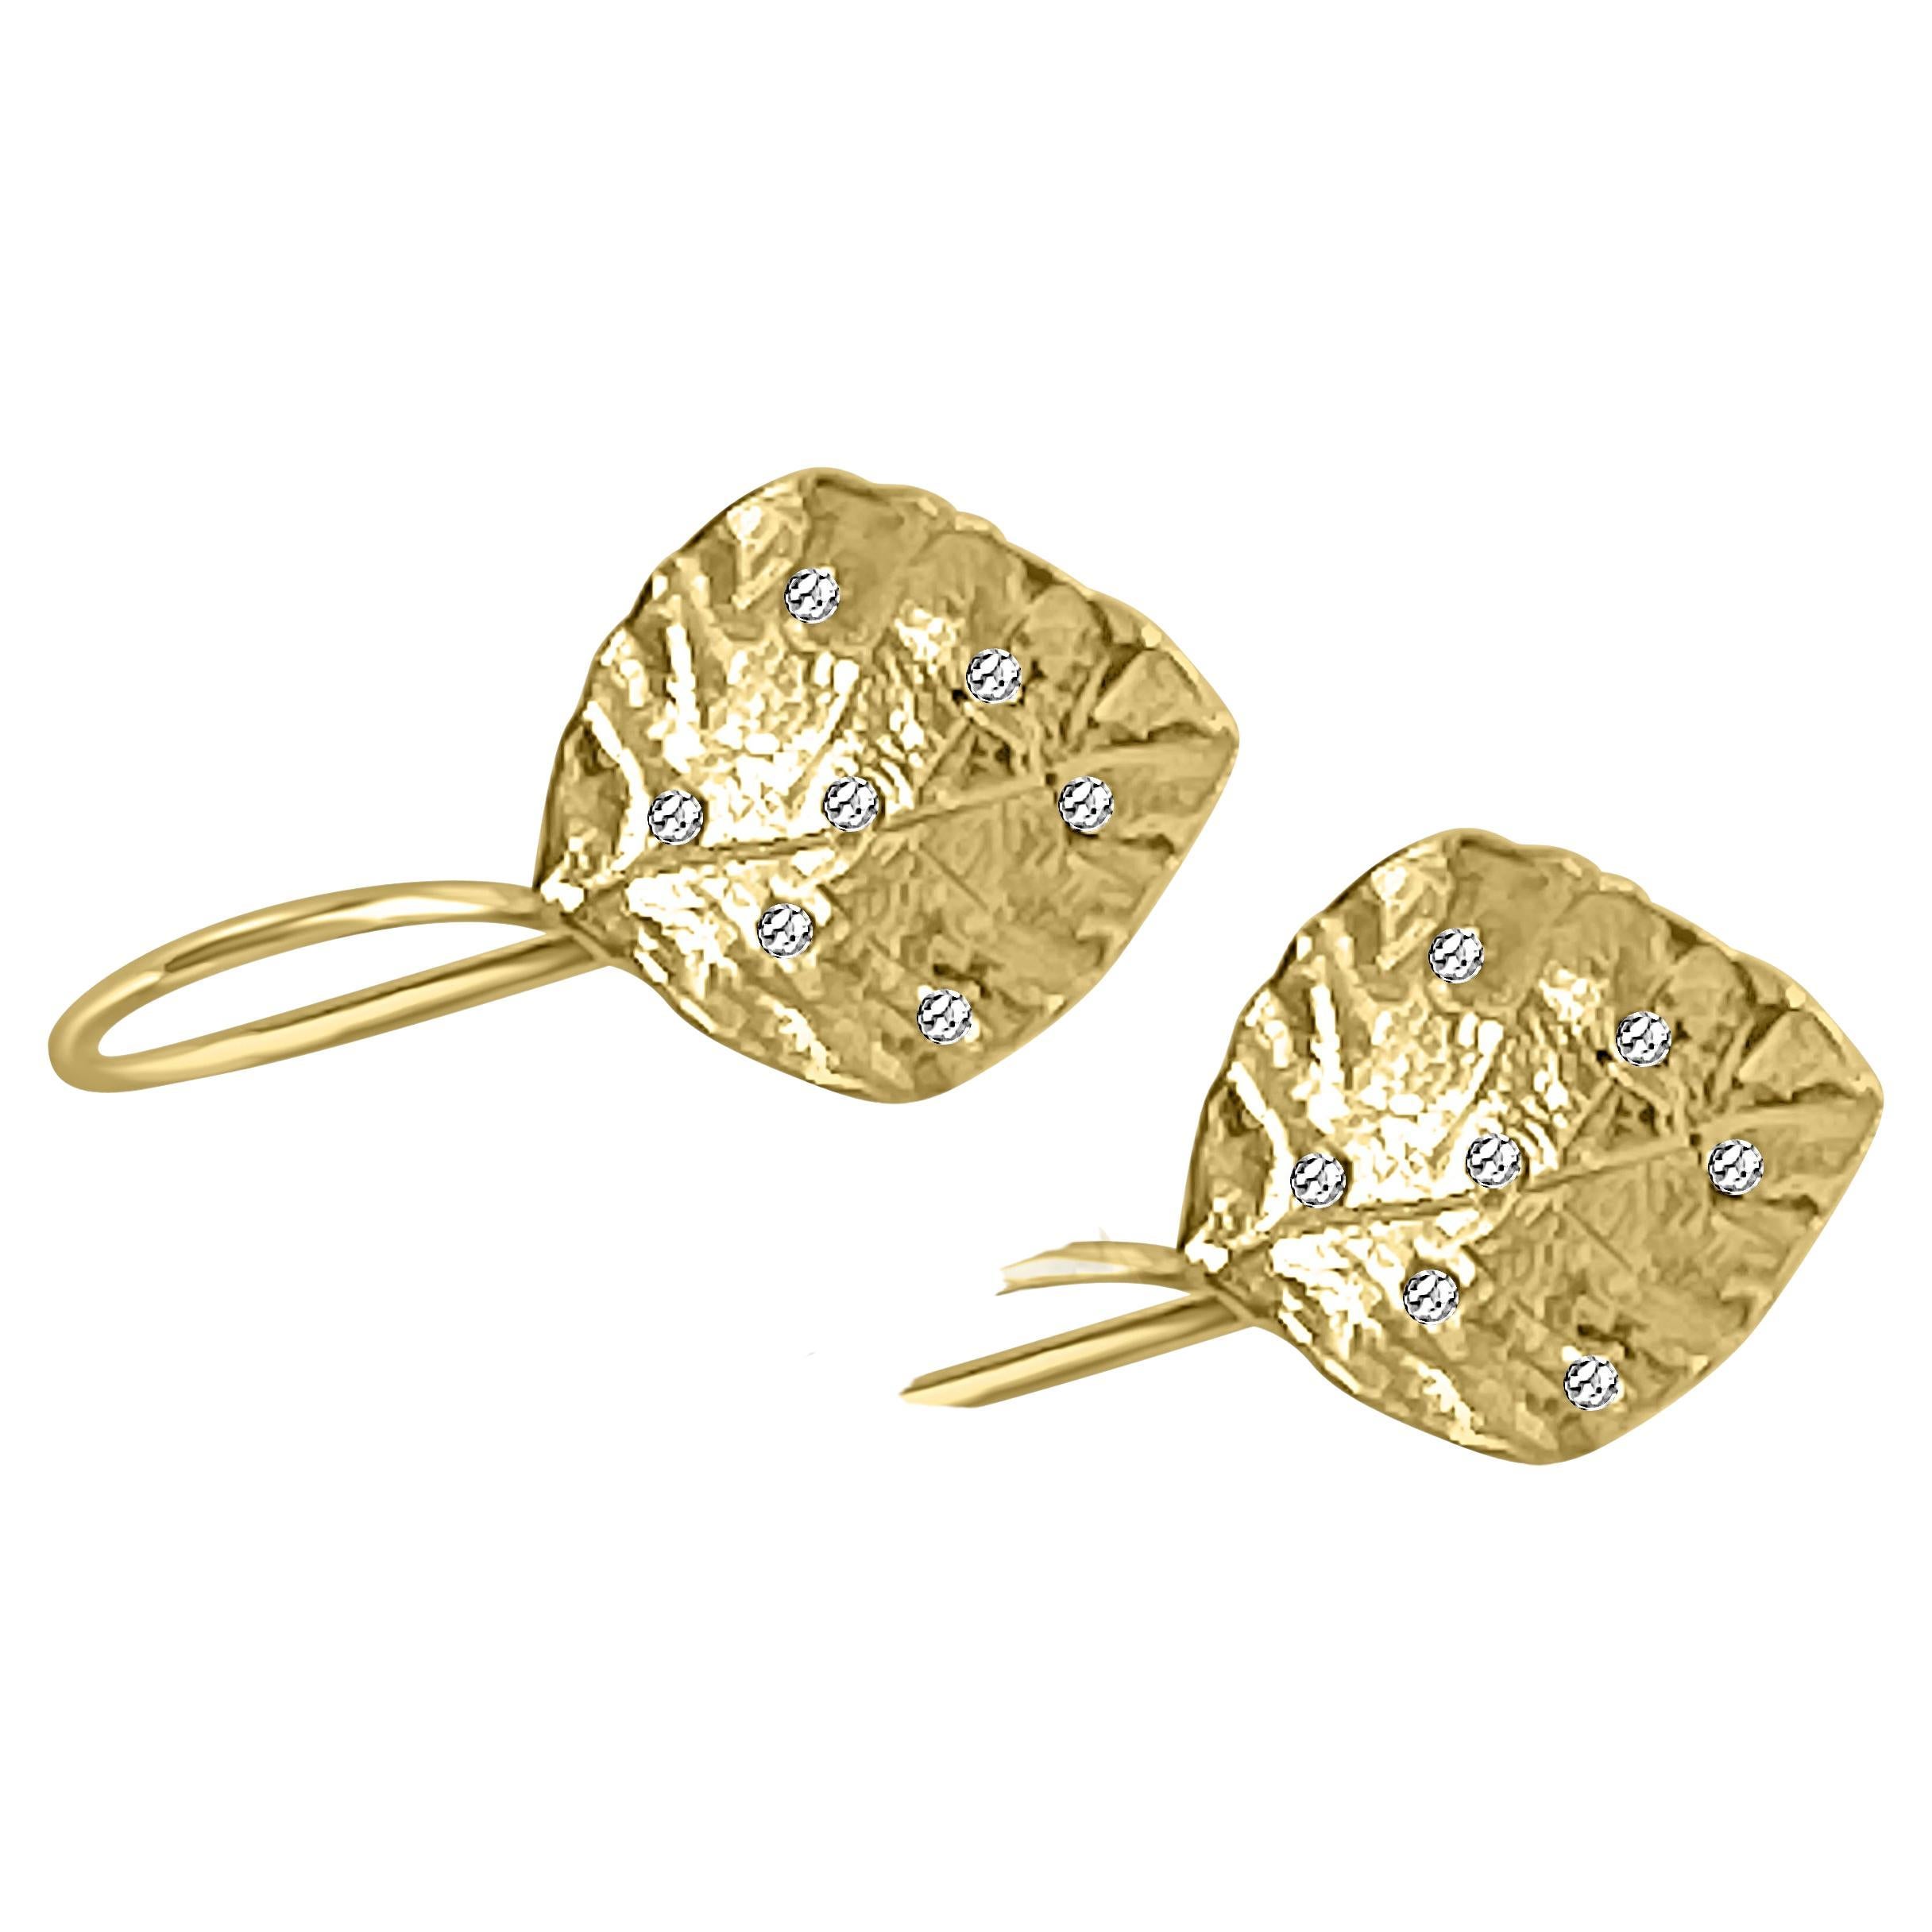 Isabel Alexander takes the subtlety of 14K gold and the sparkle of the classic diamond and infuses them into a beautiful, elegant and modern shape. Unique textures are creatively mixed with scattered diamonds in this one-of-kind leaf